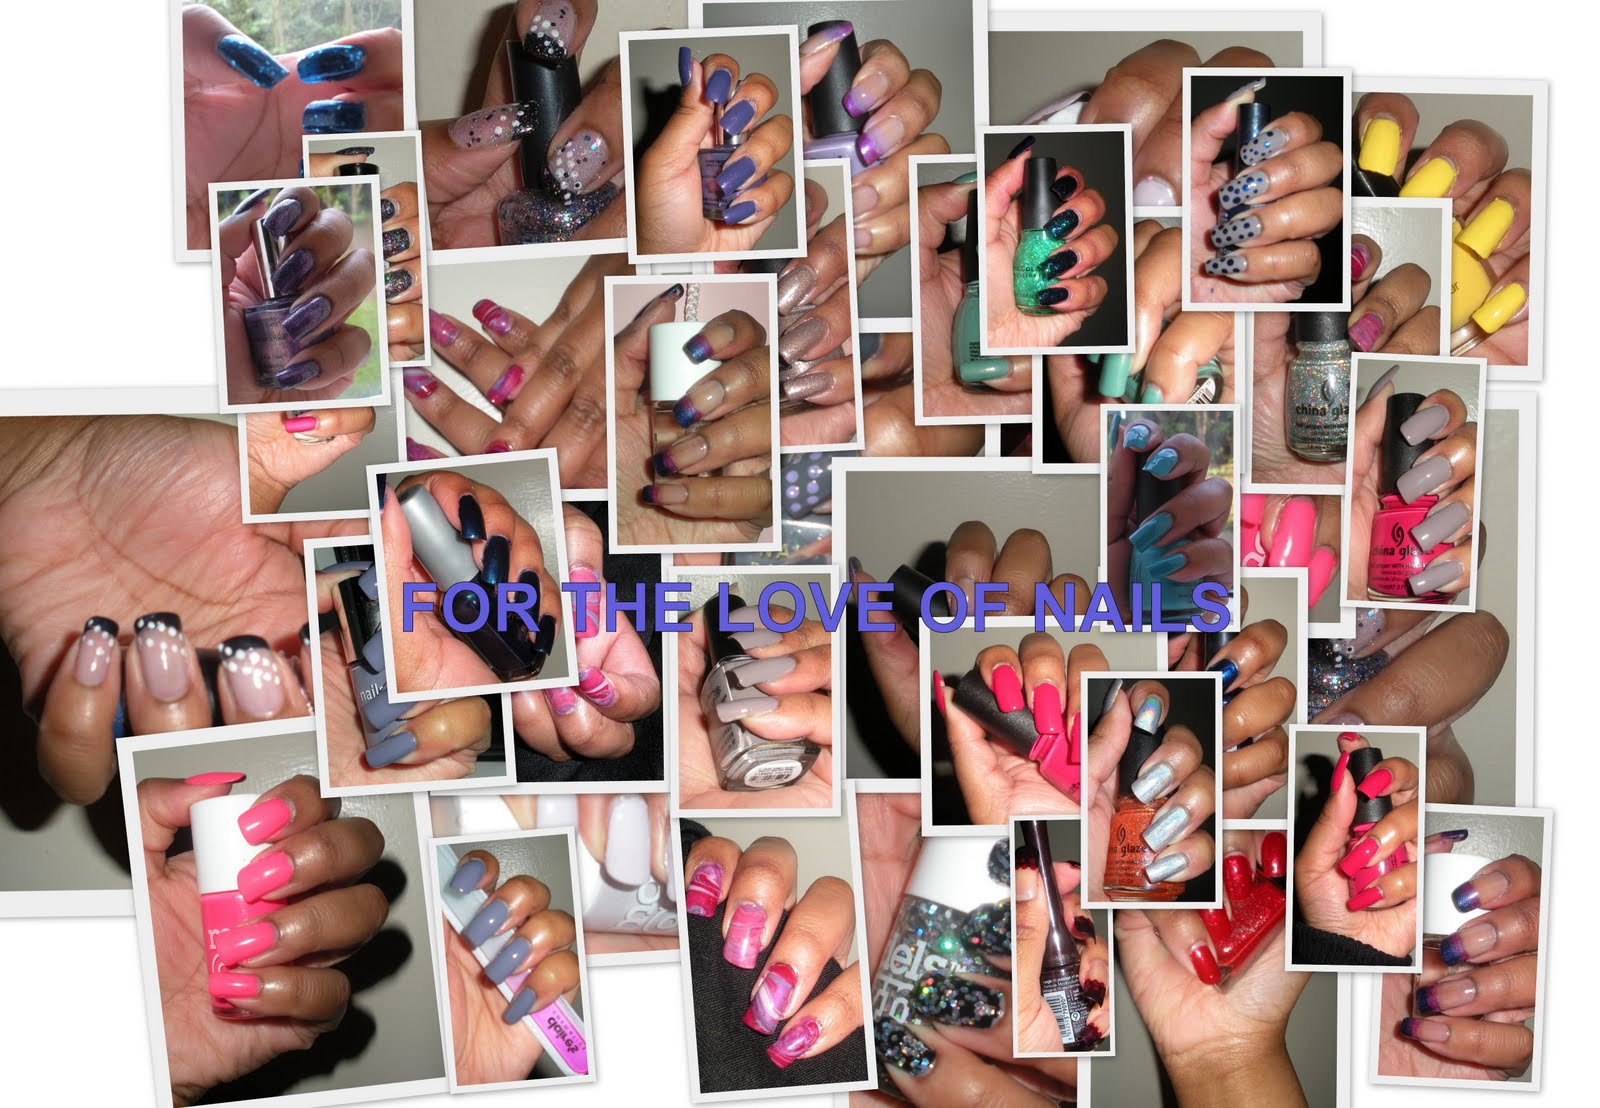 For the love of nails...